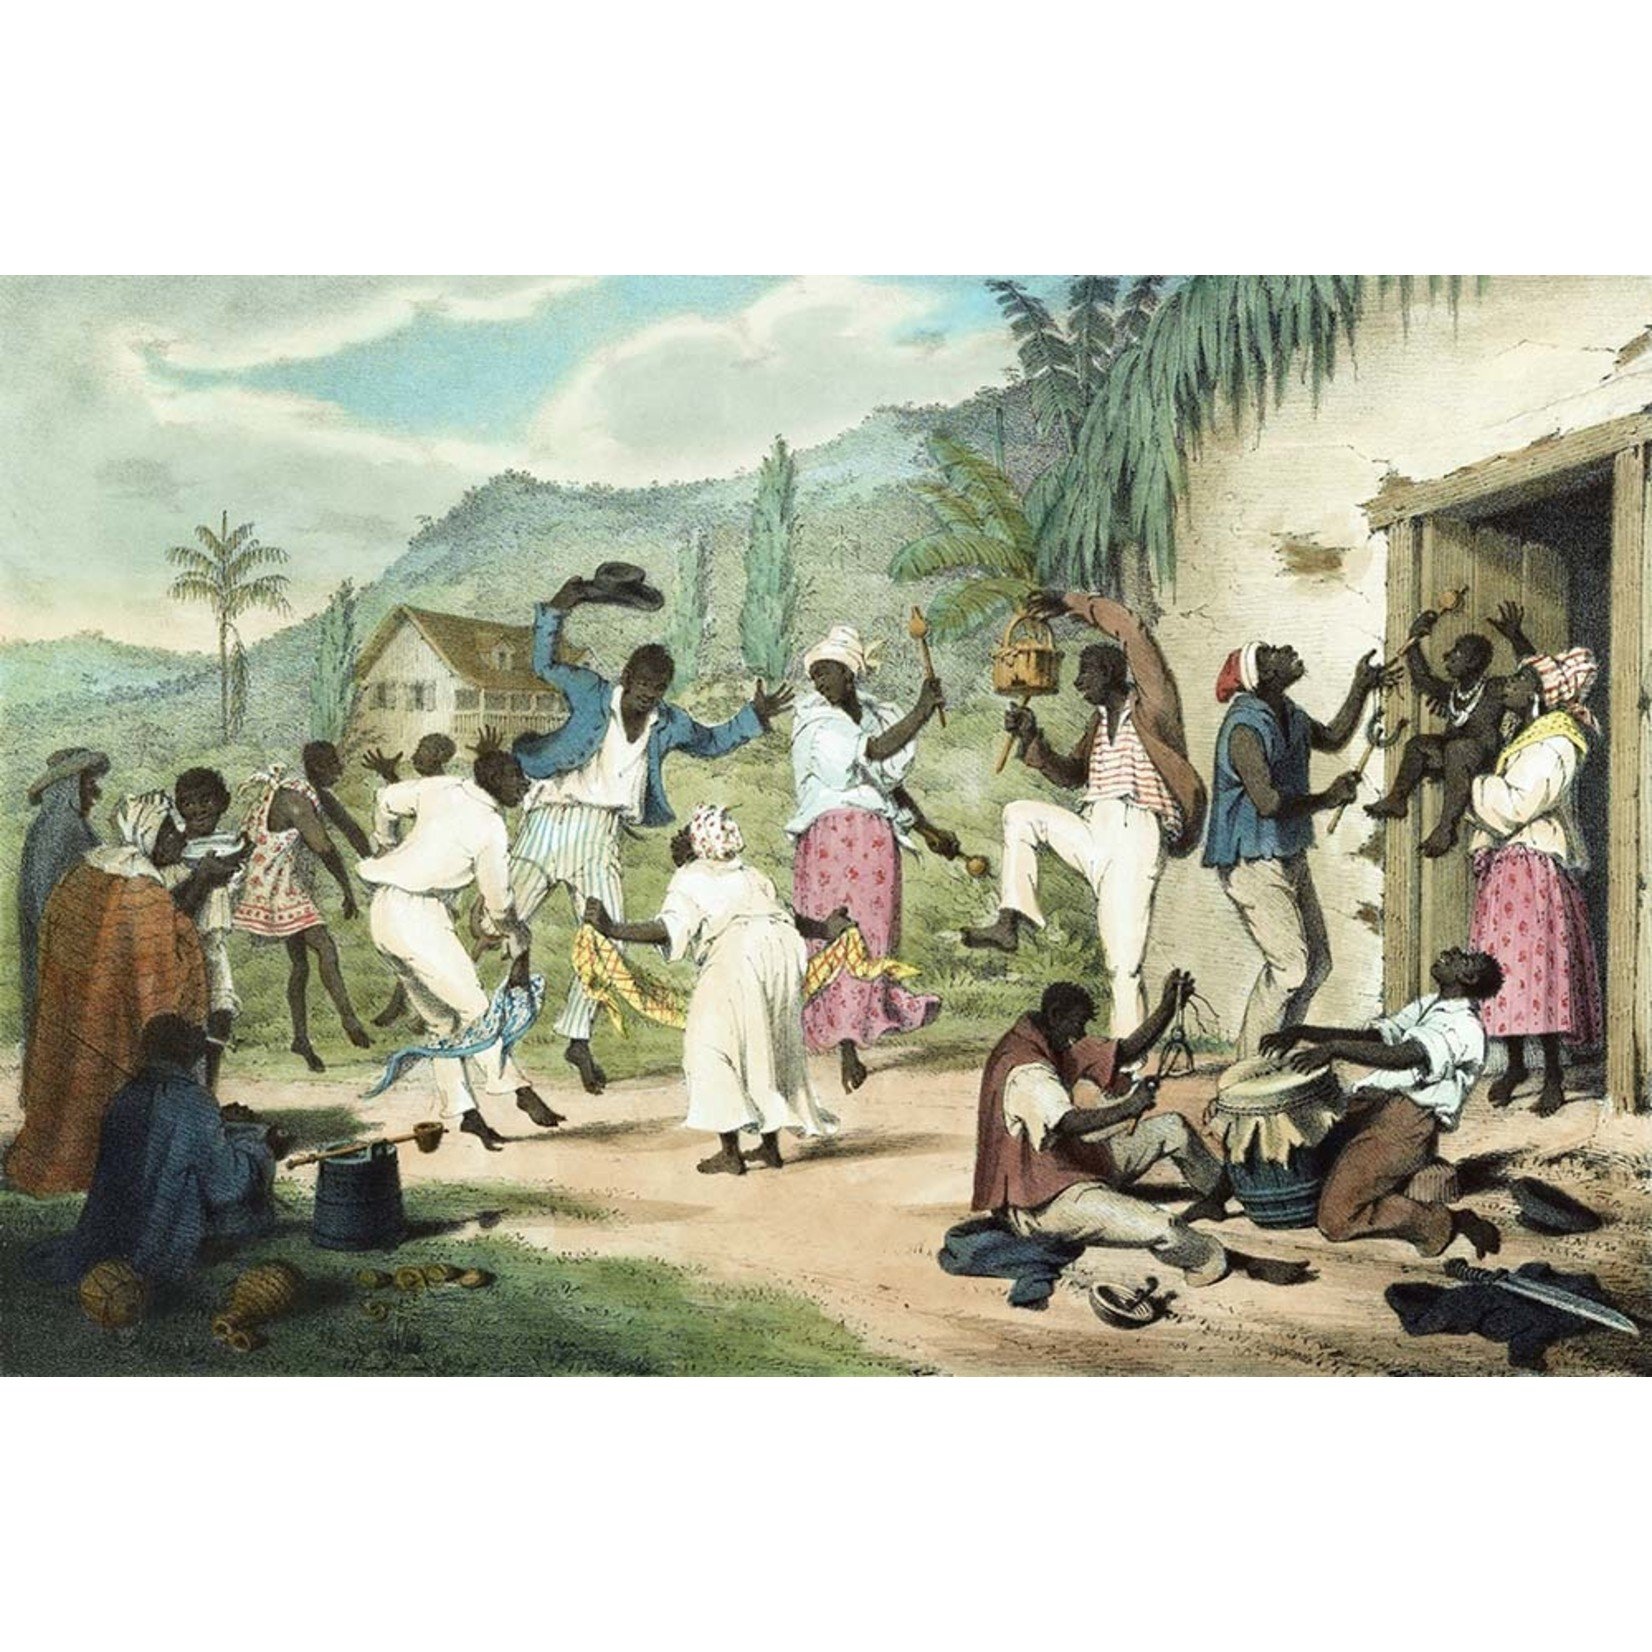 Framed Print on Rag Paper: African Trinidadians Dancing and Singing by Keith Lance via Getty Images Gallery